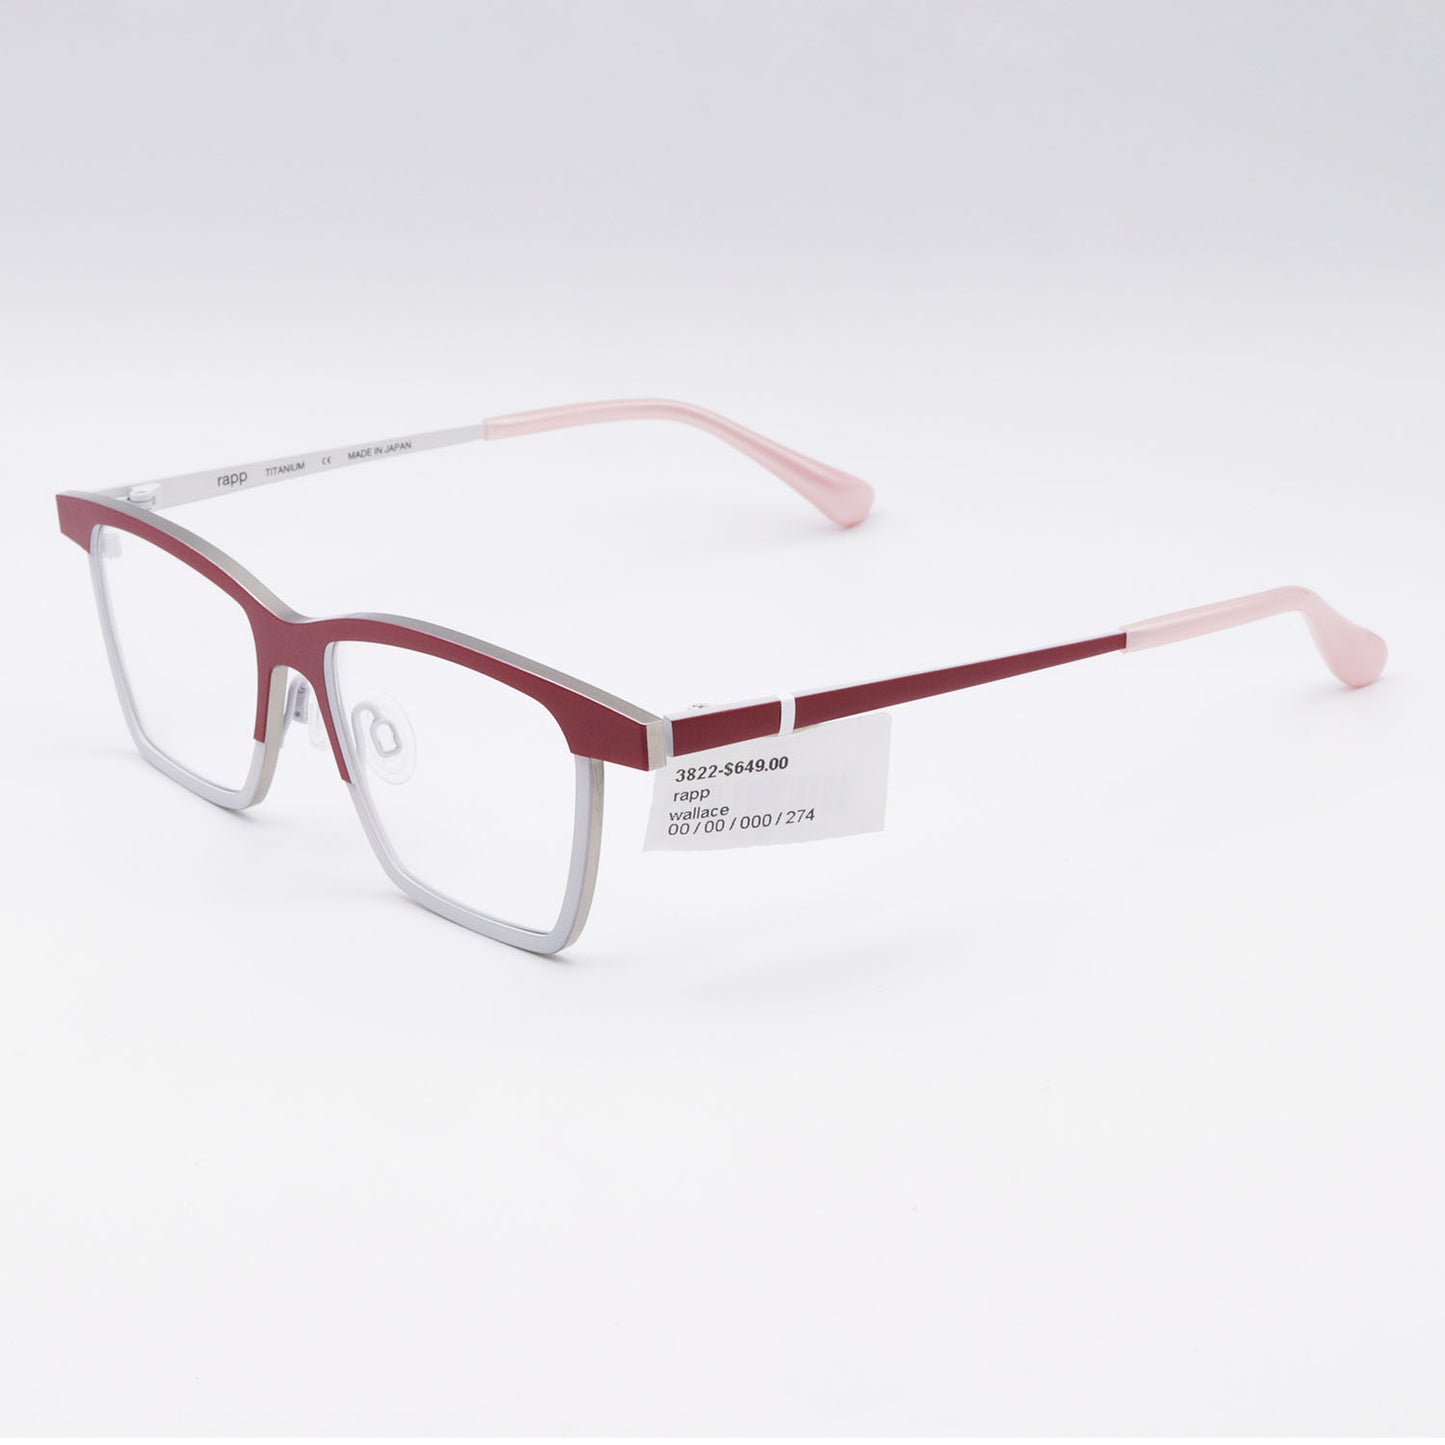 Wallace Rapp Frames Glasses Red and White